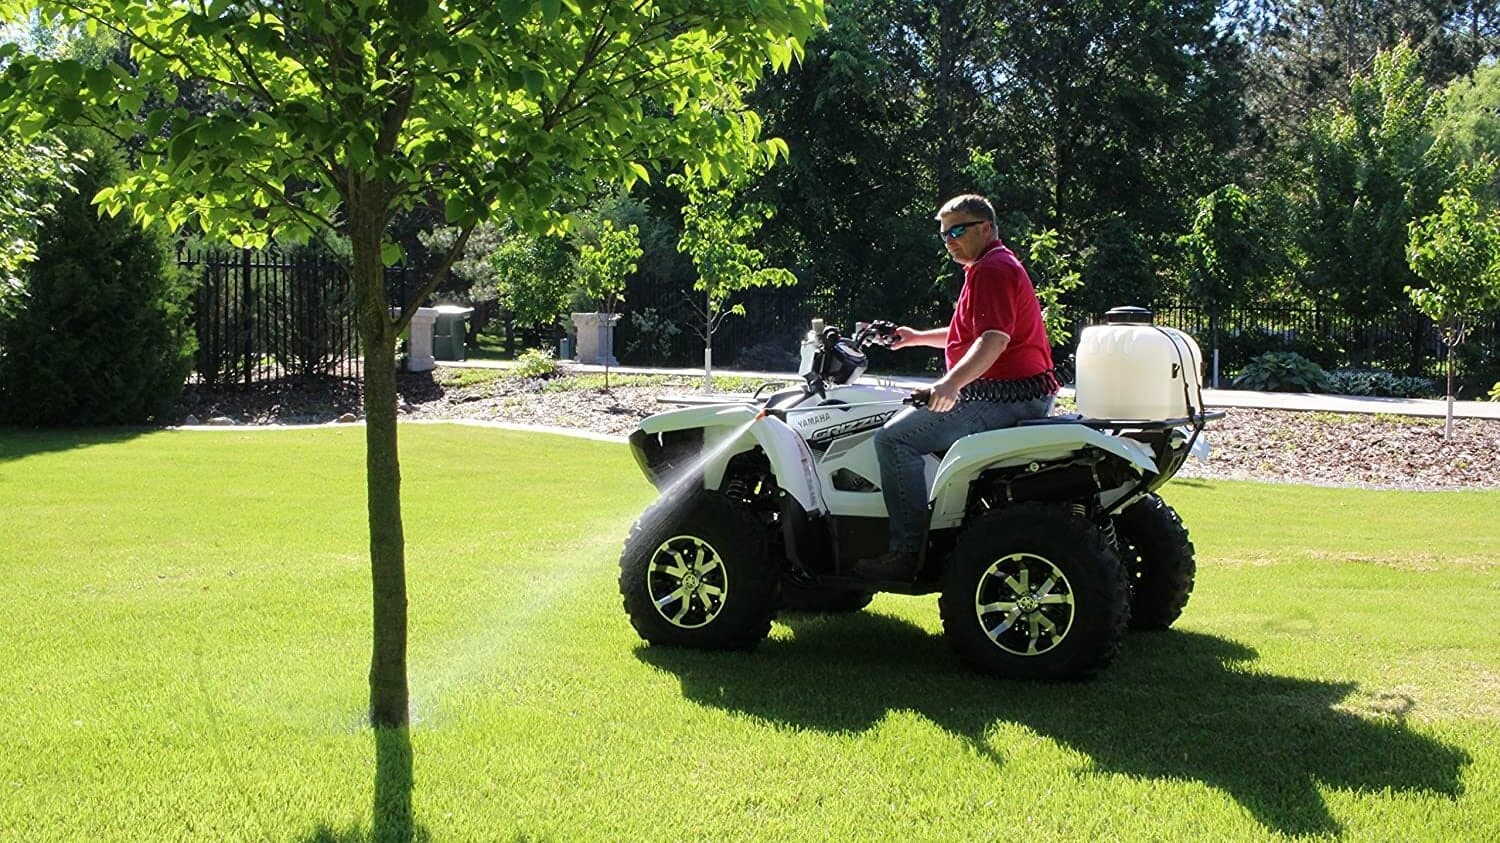 The Best ATV Boom Sprayers (Review & Buying Guide) in 2022